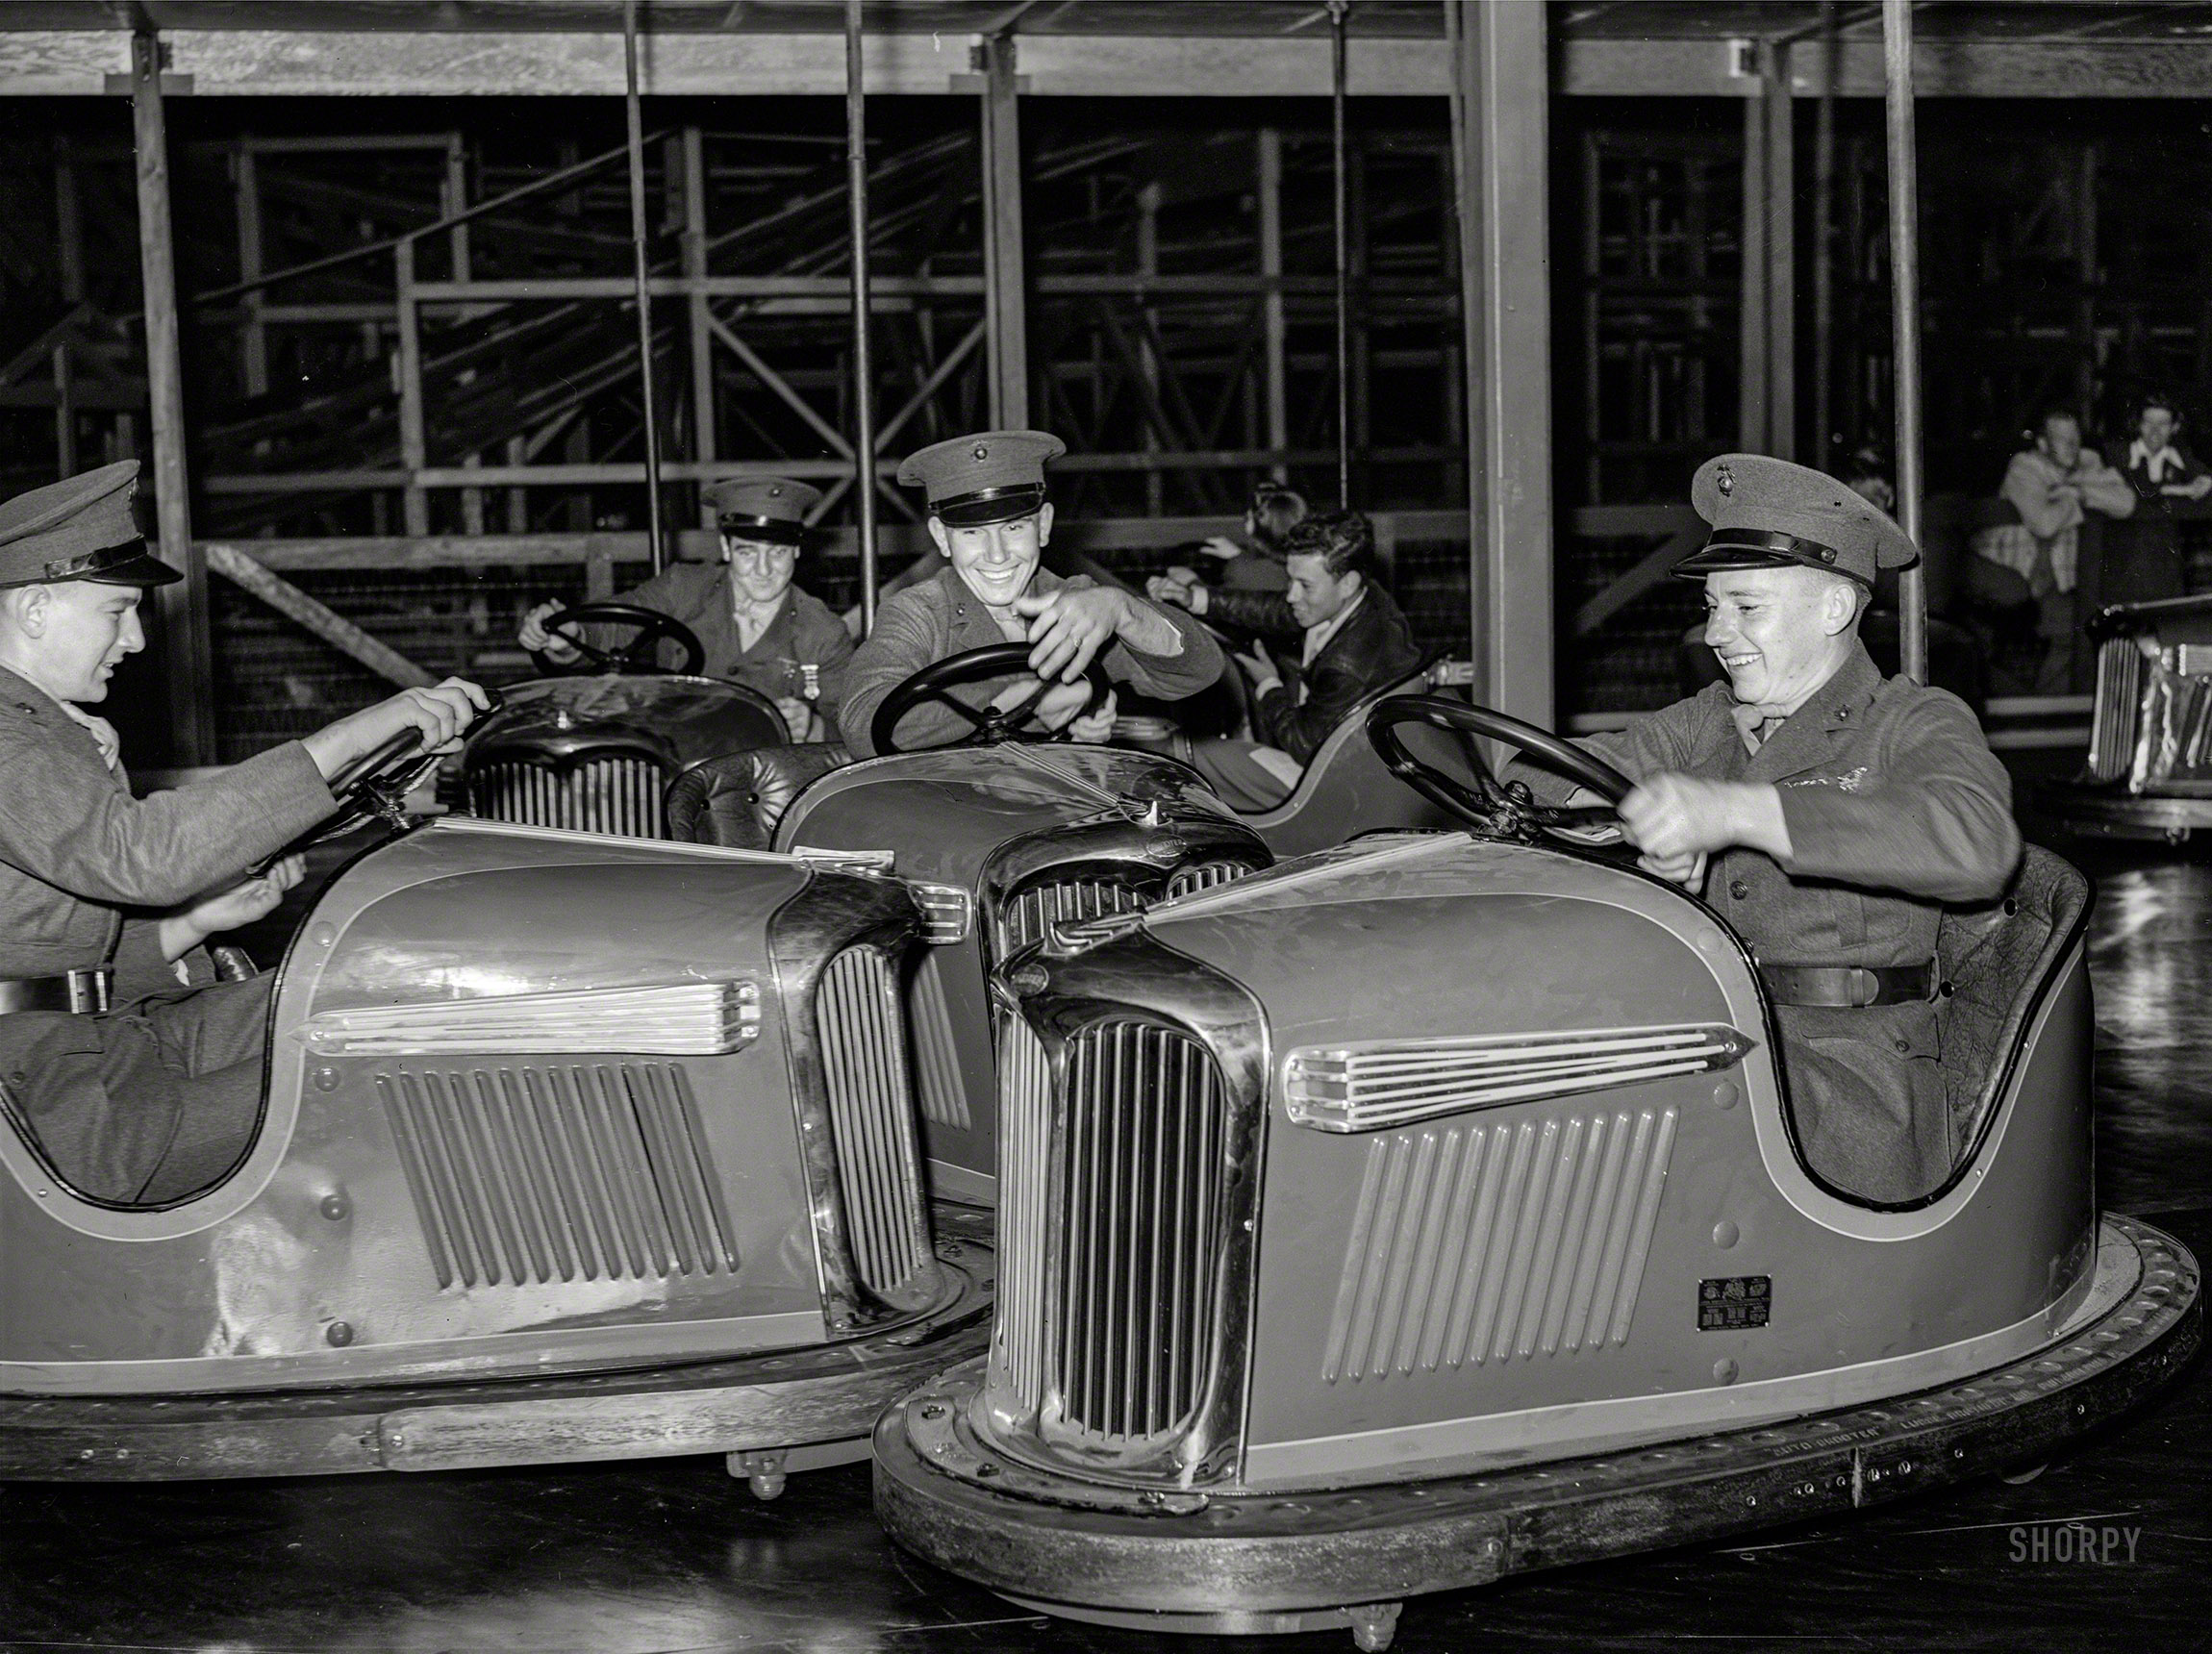 May 1941. "Marines riding the electric automobiles at Mission Beach amusement center, San Diego." Medium format negative by Russell Lee. View full size.